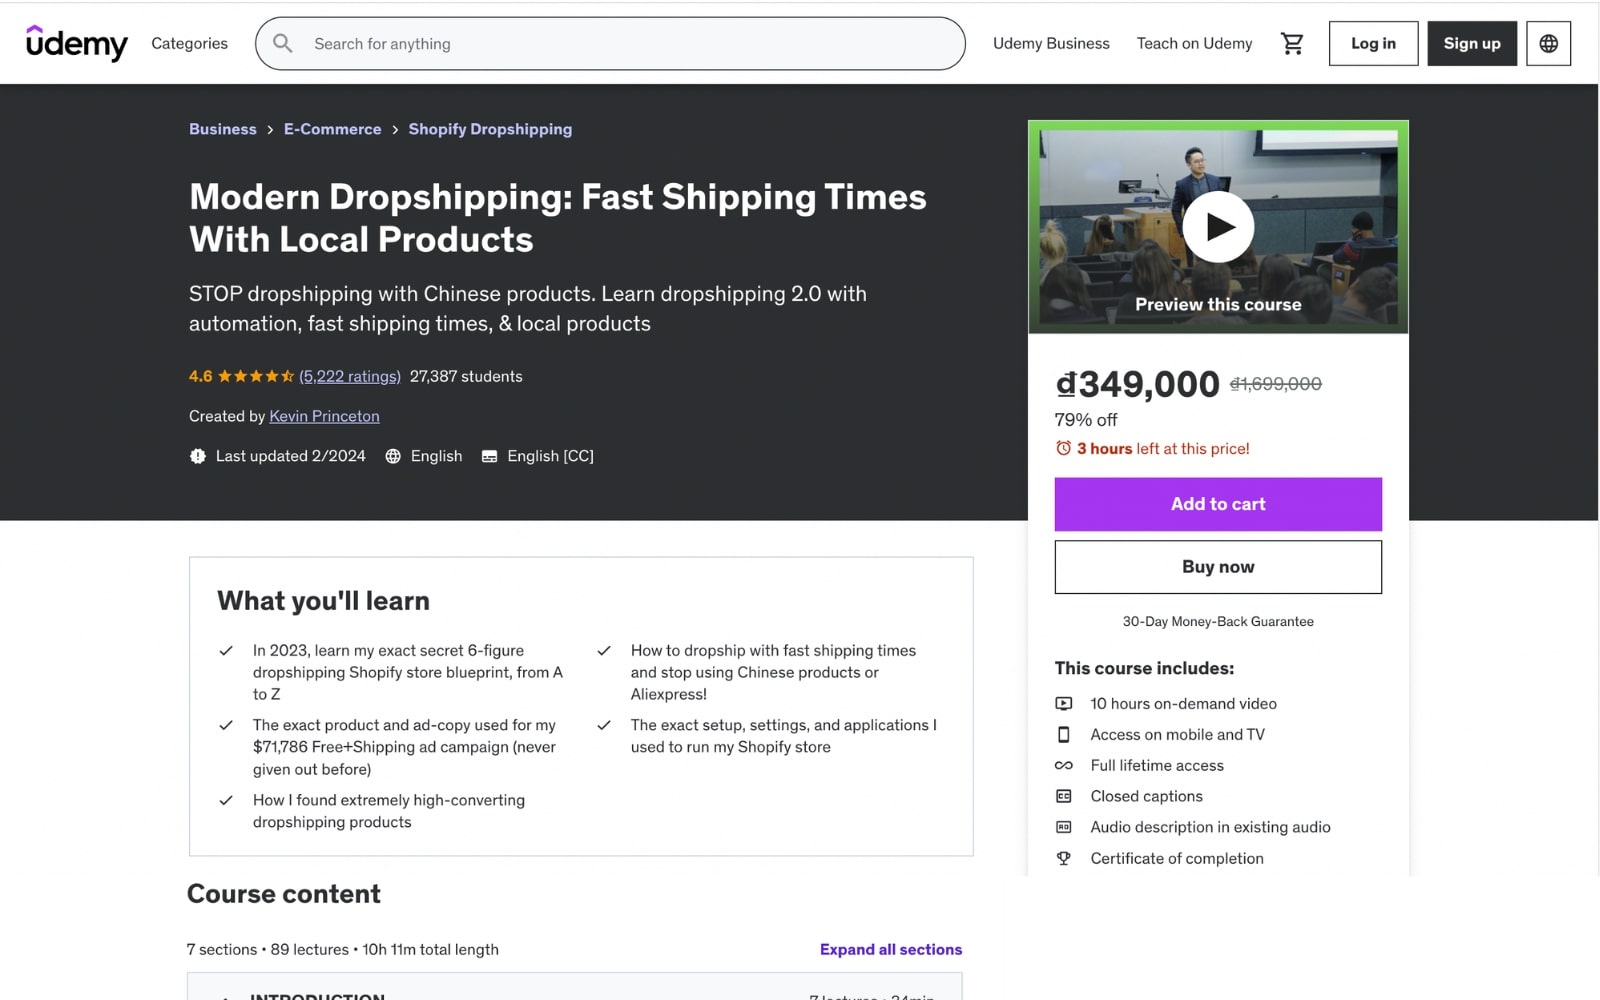 Modern Dropshipping: Fast Shipping Times With Local Products